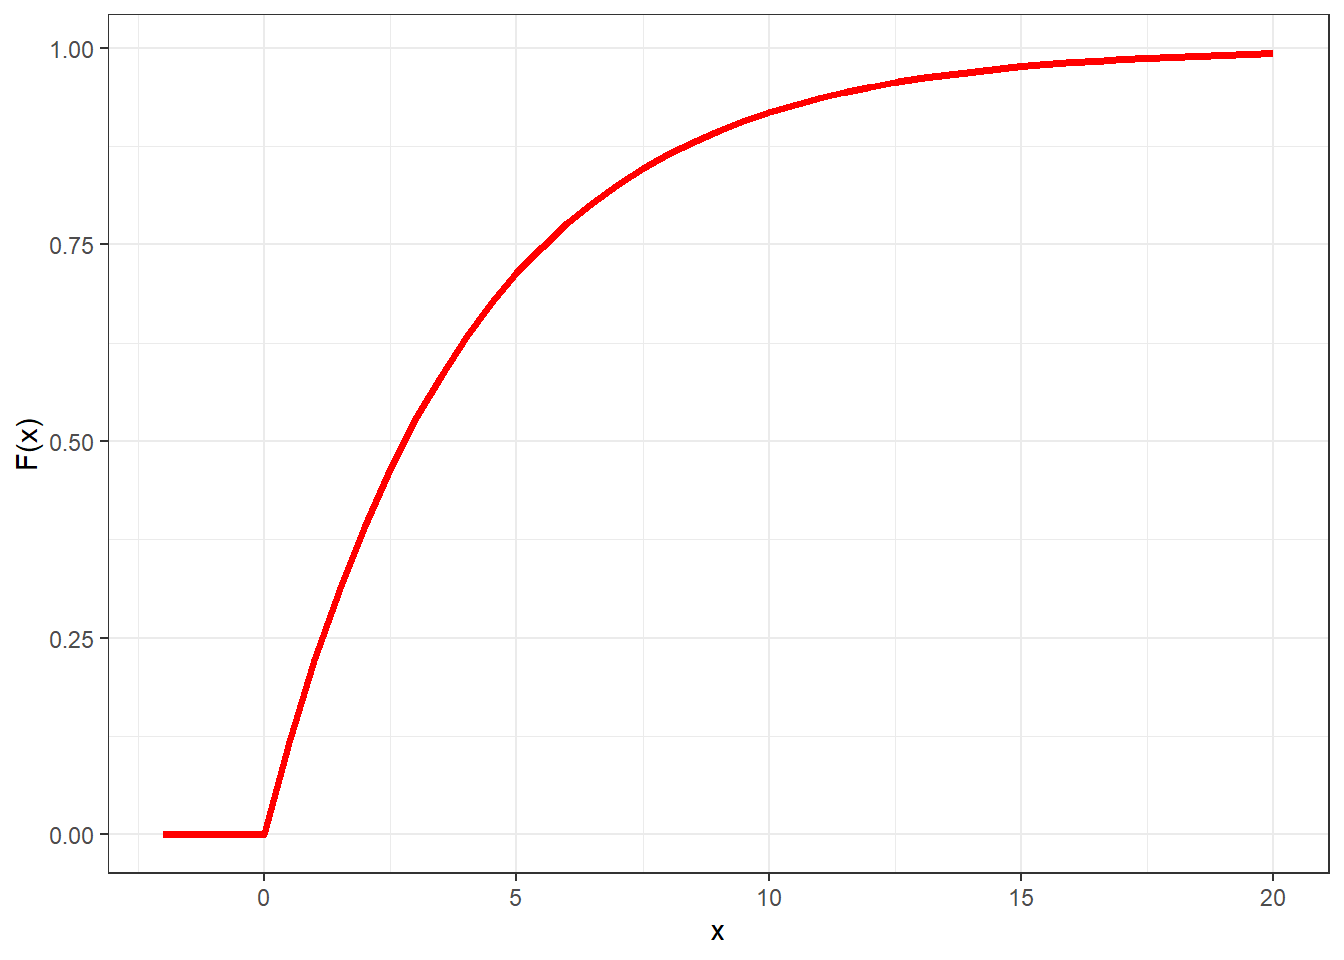 Cumulative distribution function for the waiting time at the donut shop